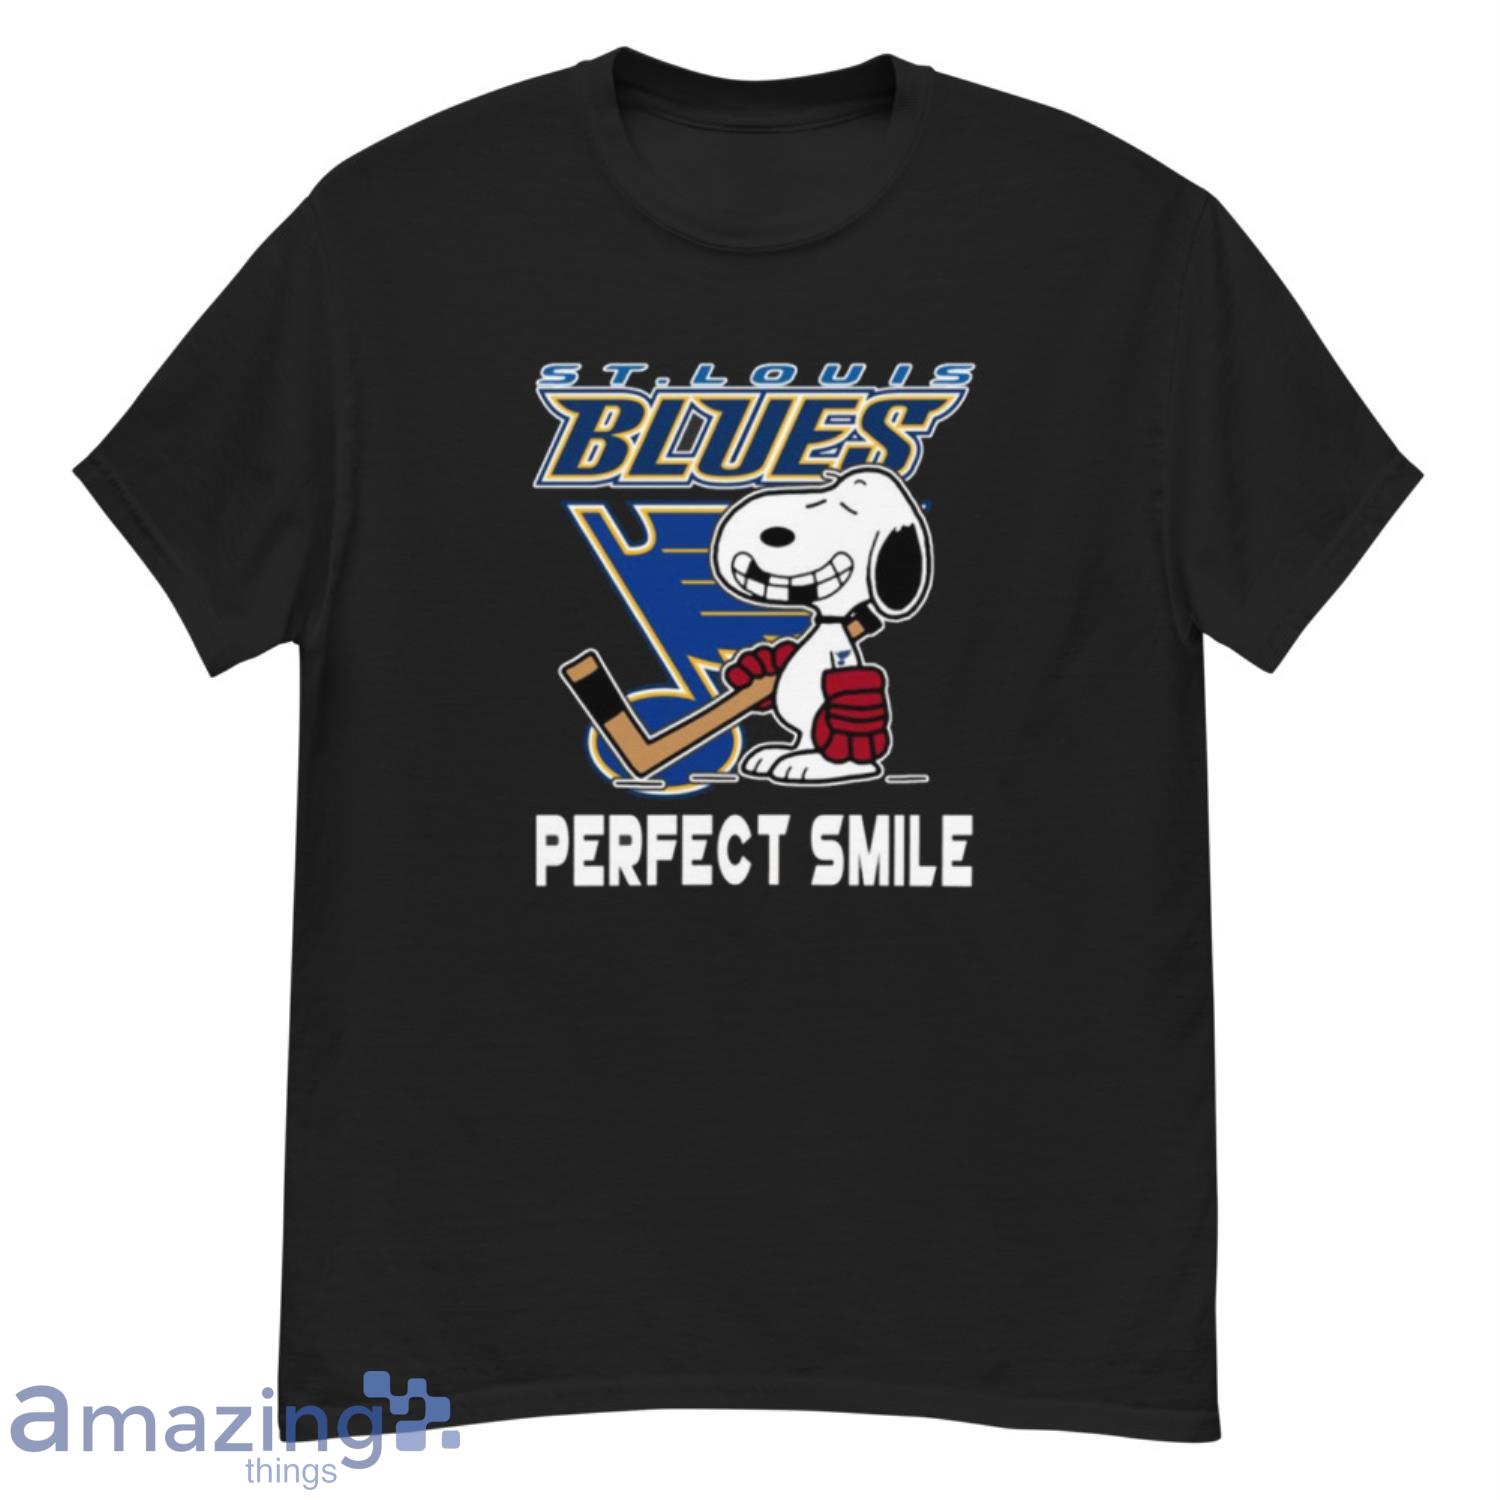 Let's Play St. Louis Blues Ice Hockey Snoopy NHL Shirt 